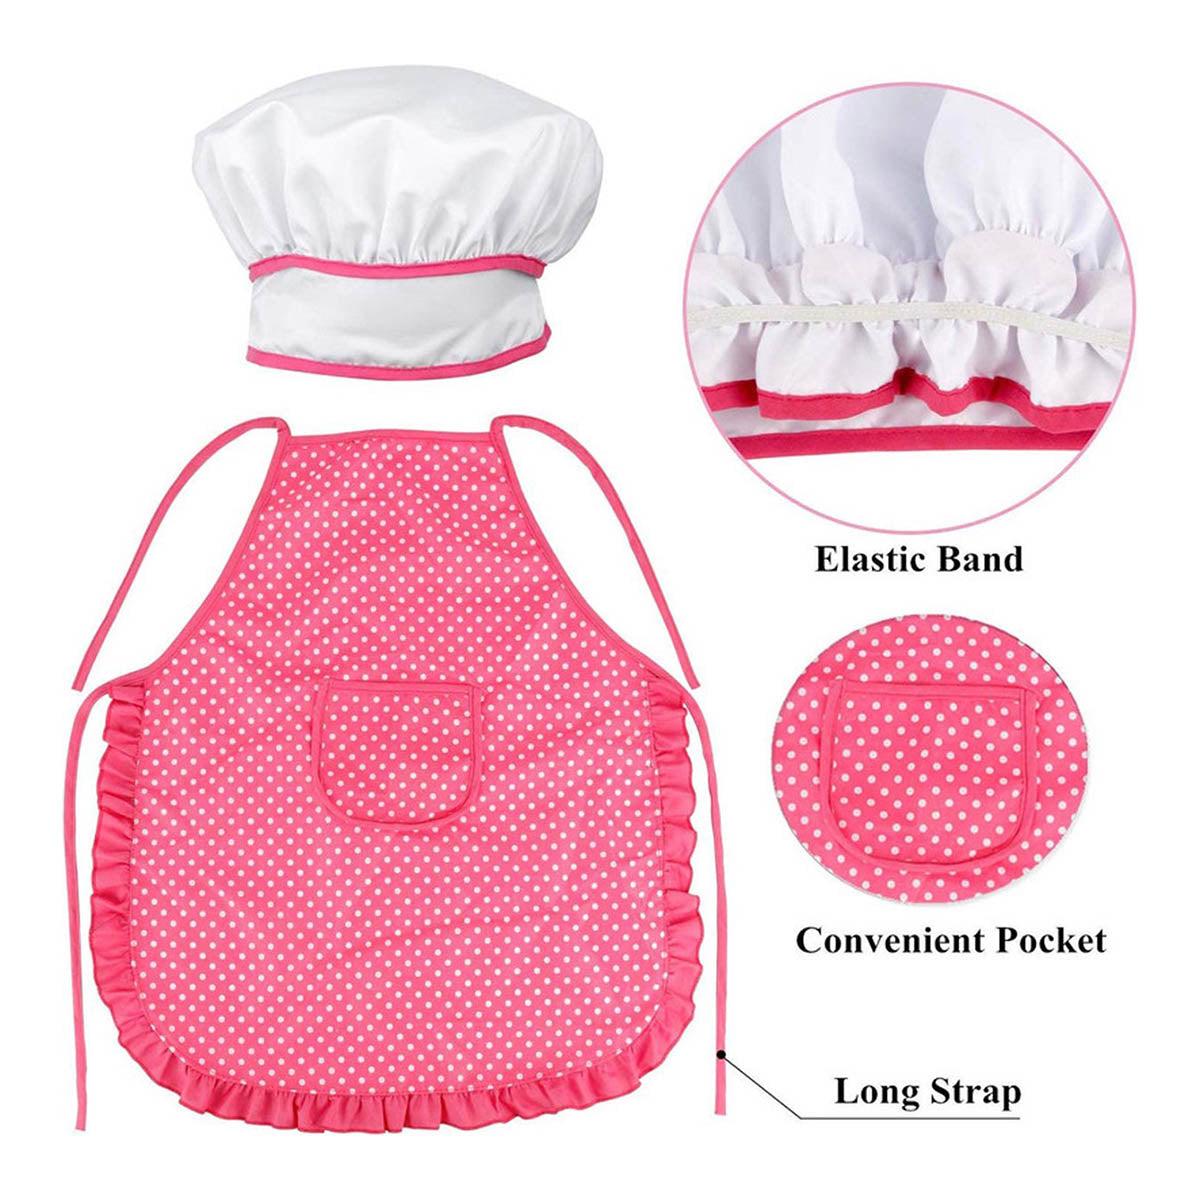 <tc>Ariko</tc> Luxury kitchen chef play set | Kitchen Apron Pink Including Cooking Hat, Oven Mitt, Whisk, Rolling Pin & Spatula | Cooking set | Role Play | In a beautiful gift box |